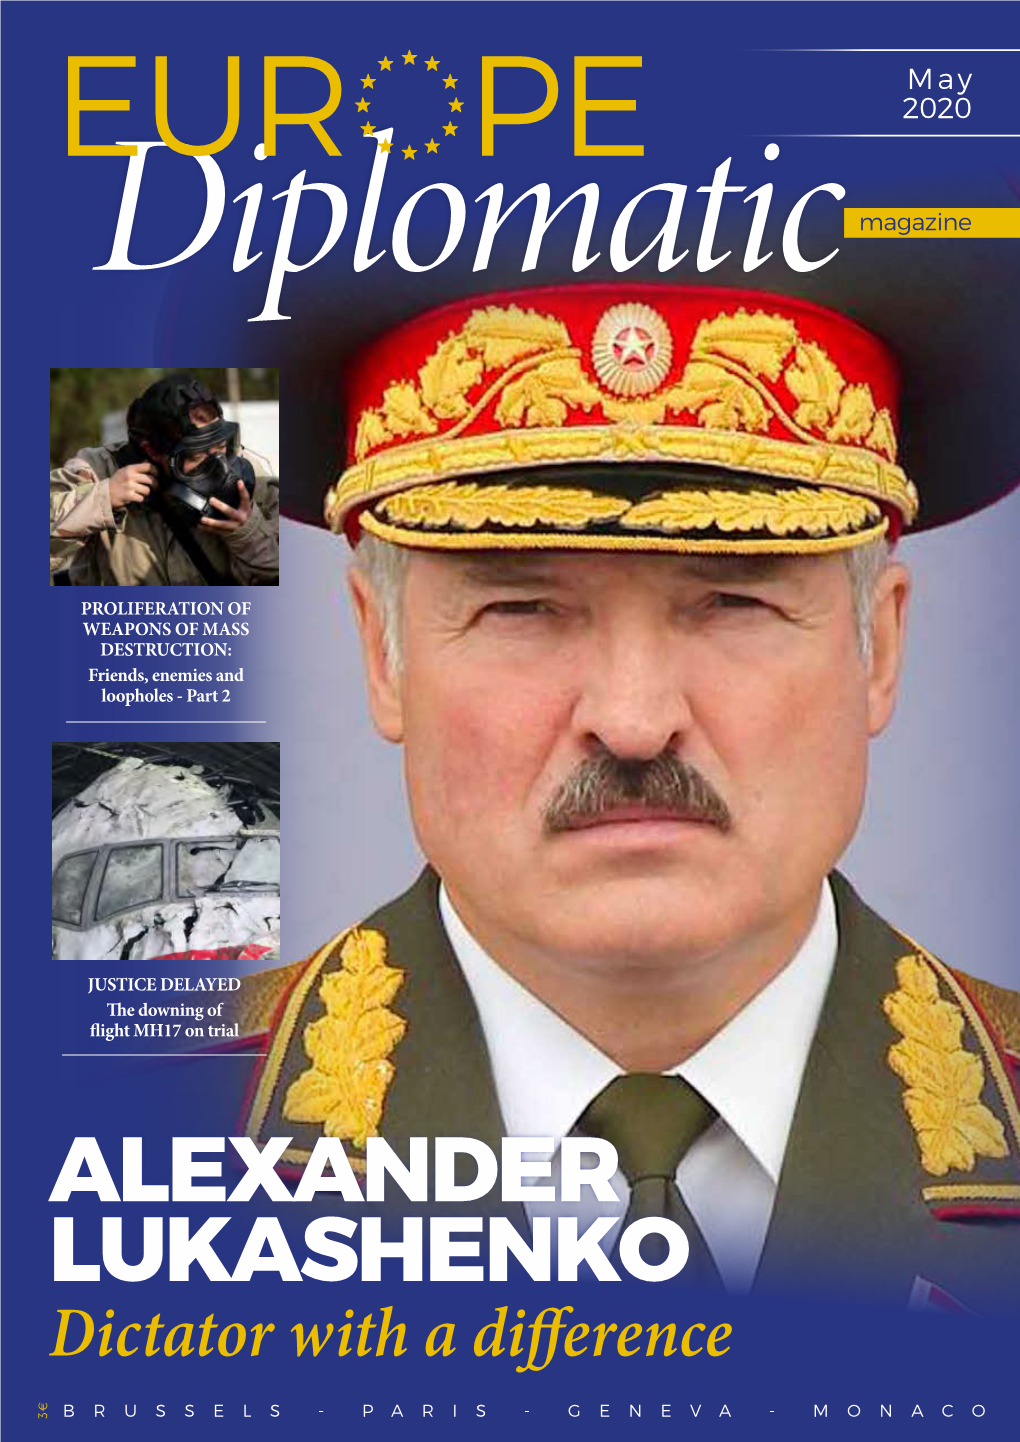 ALEXANDER LUKASHENKO Dictator with a Difference E